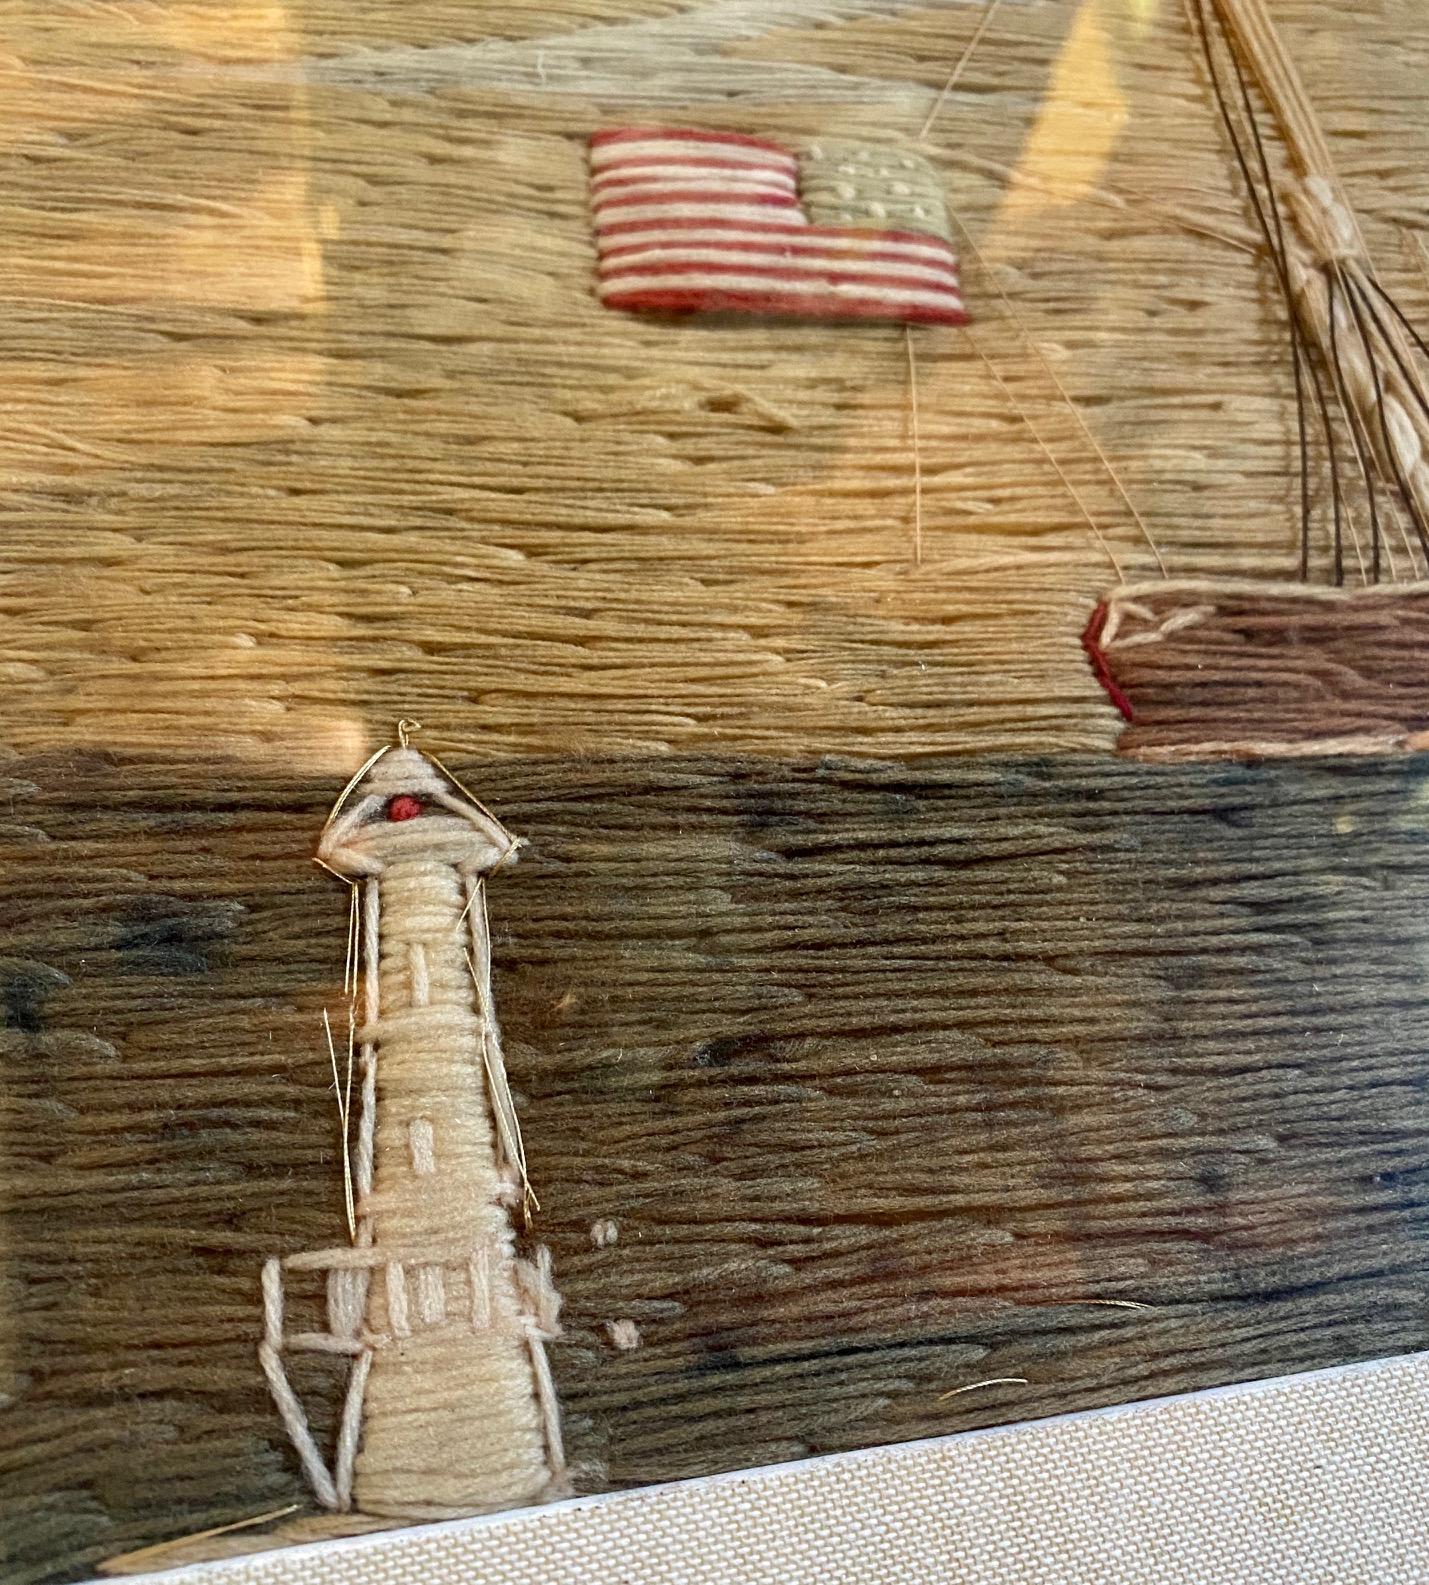 Rare 19th century American Sailor’s Woolie, from New England, circa 1850, with Three Masted Tern Schooner under furled sails, with American ensign flying astern and house flags and pennants aloft, moored in passage between two lighthouses (most